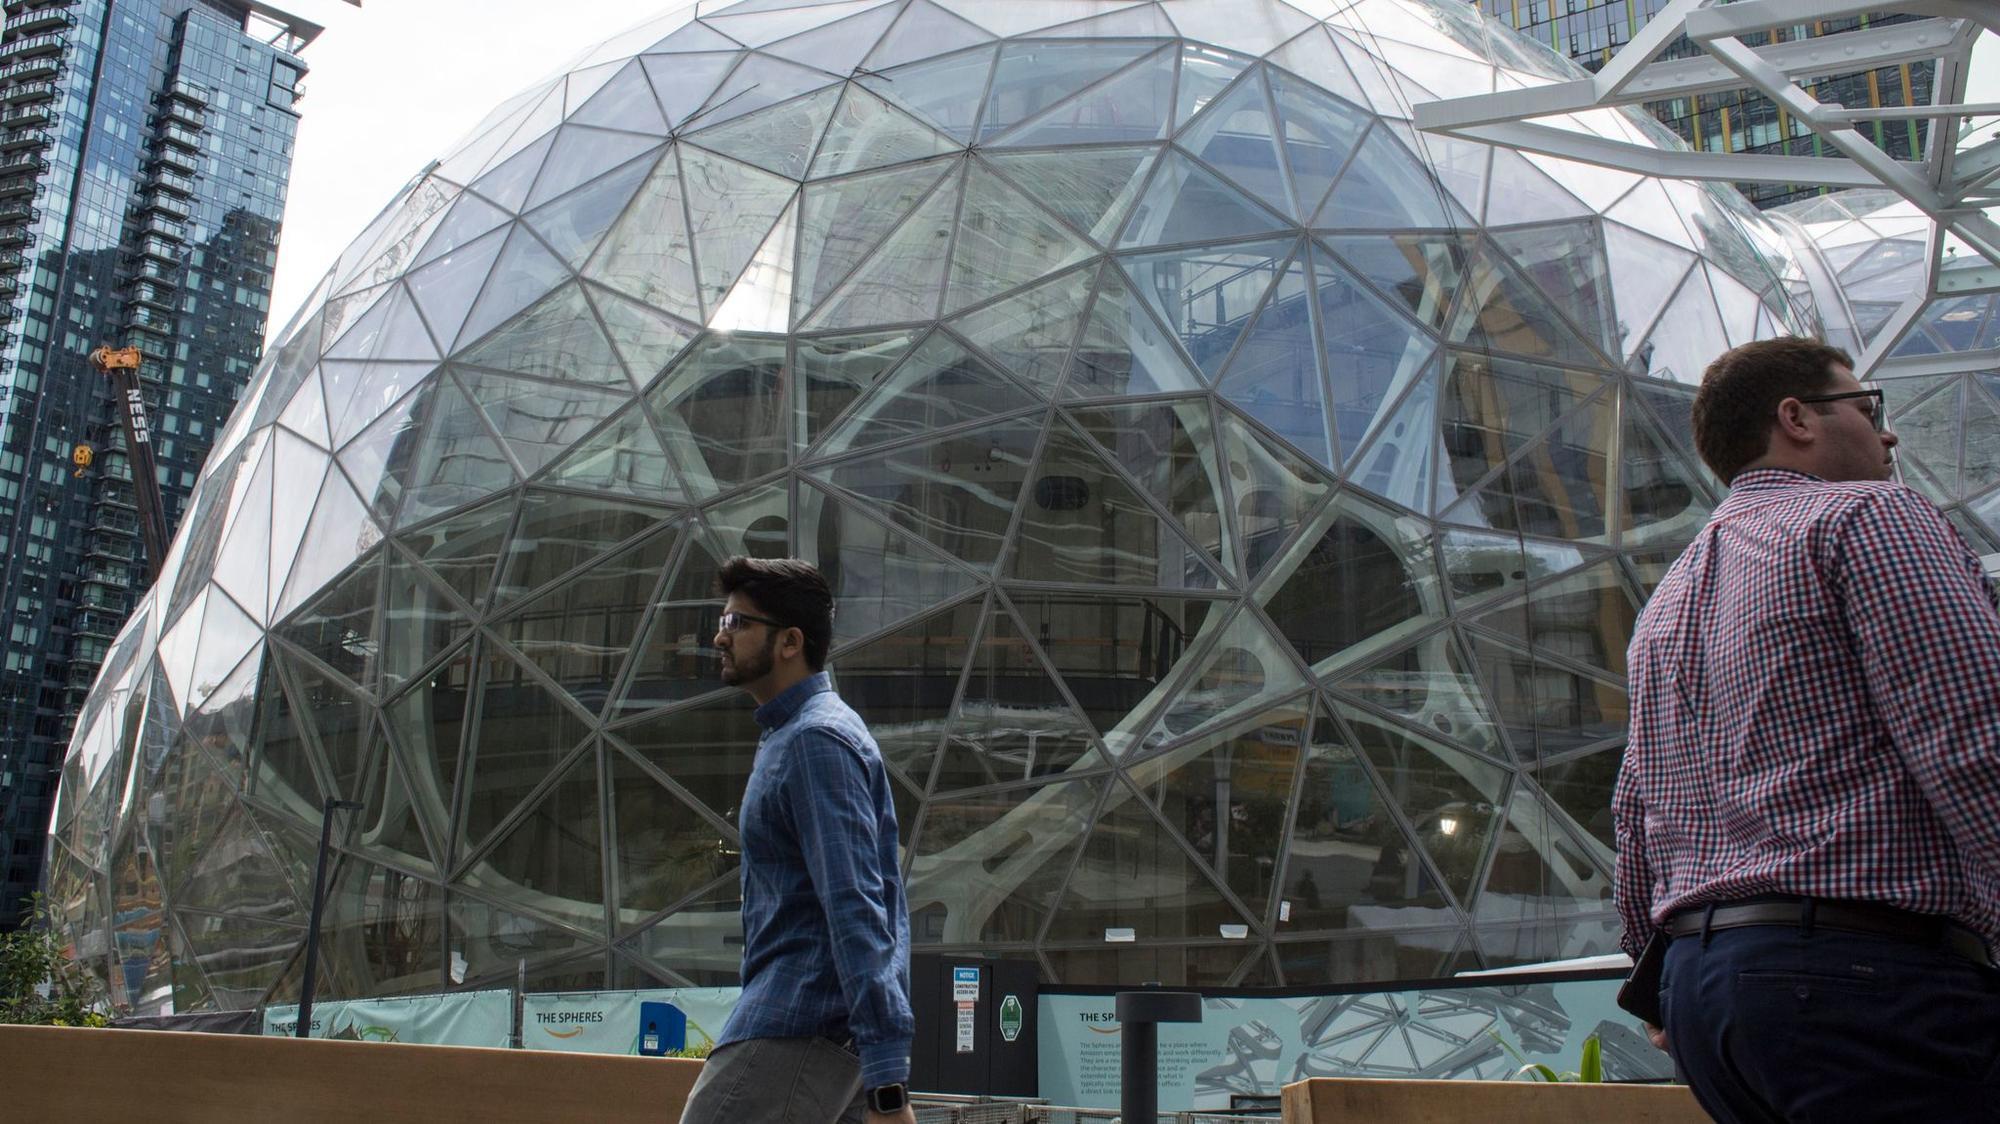 As bids for Amazon's headquarters come due, tech has a chance to spread the wealth ...